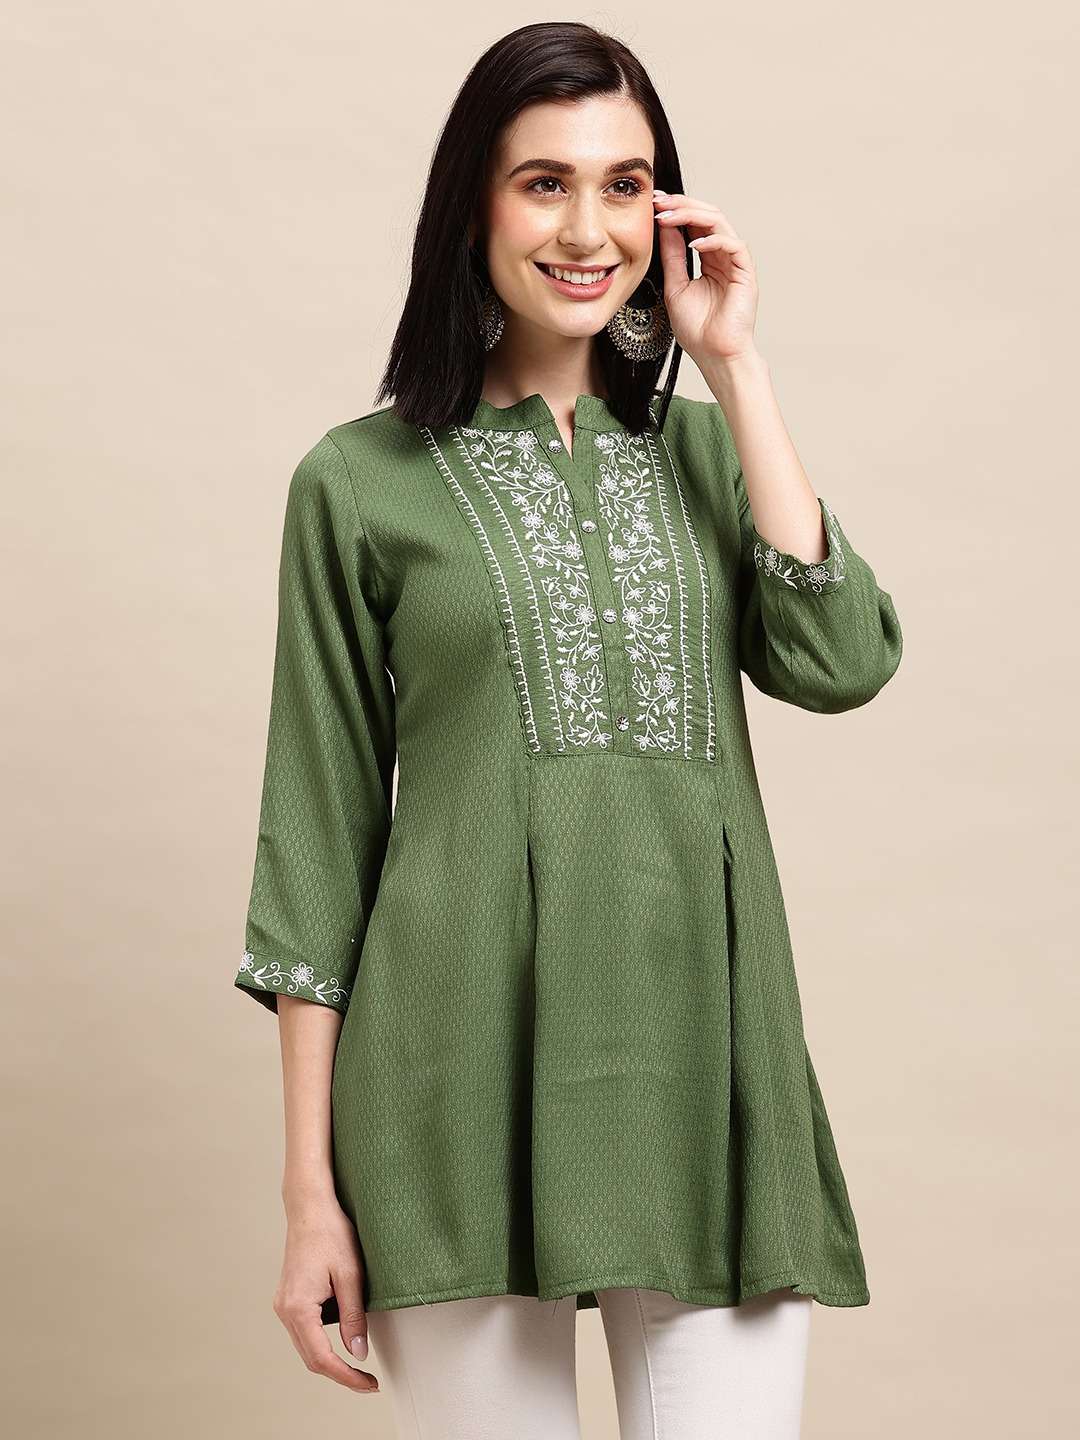 Zeny vol 6 Rayon with fancy Handwork Neck Design Kurti colle...